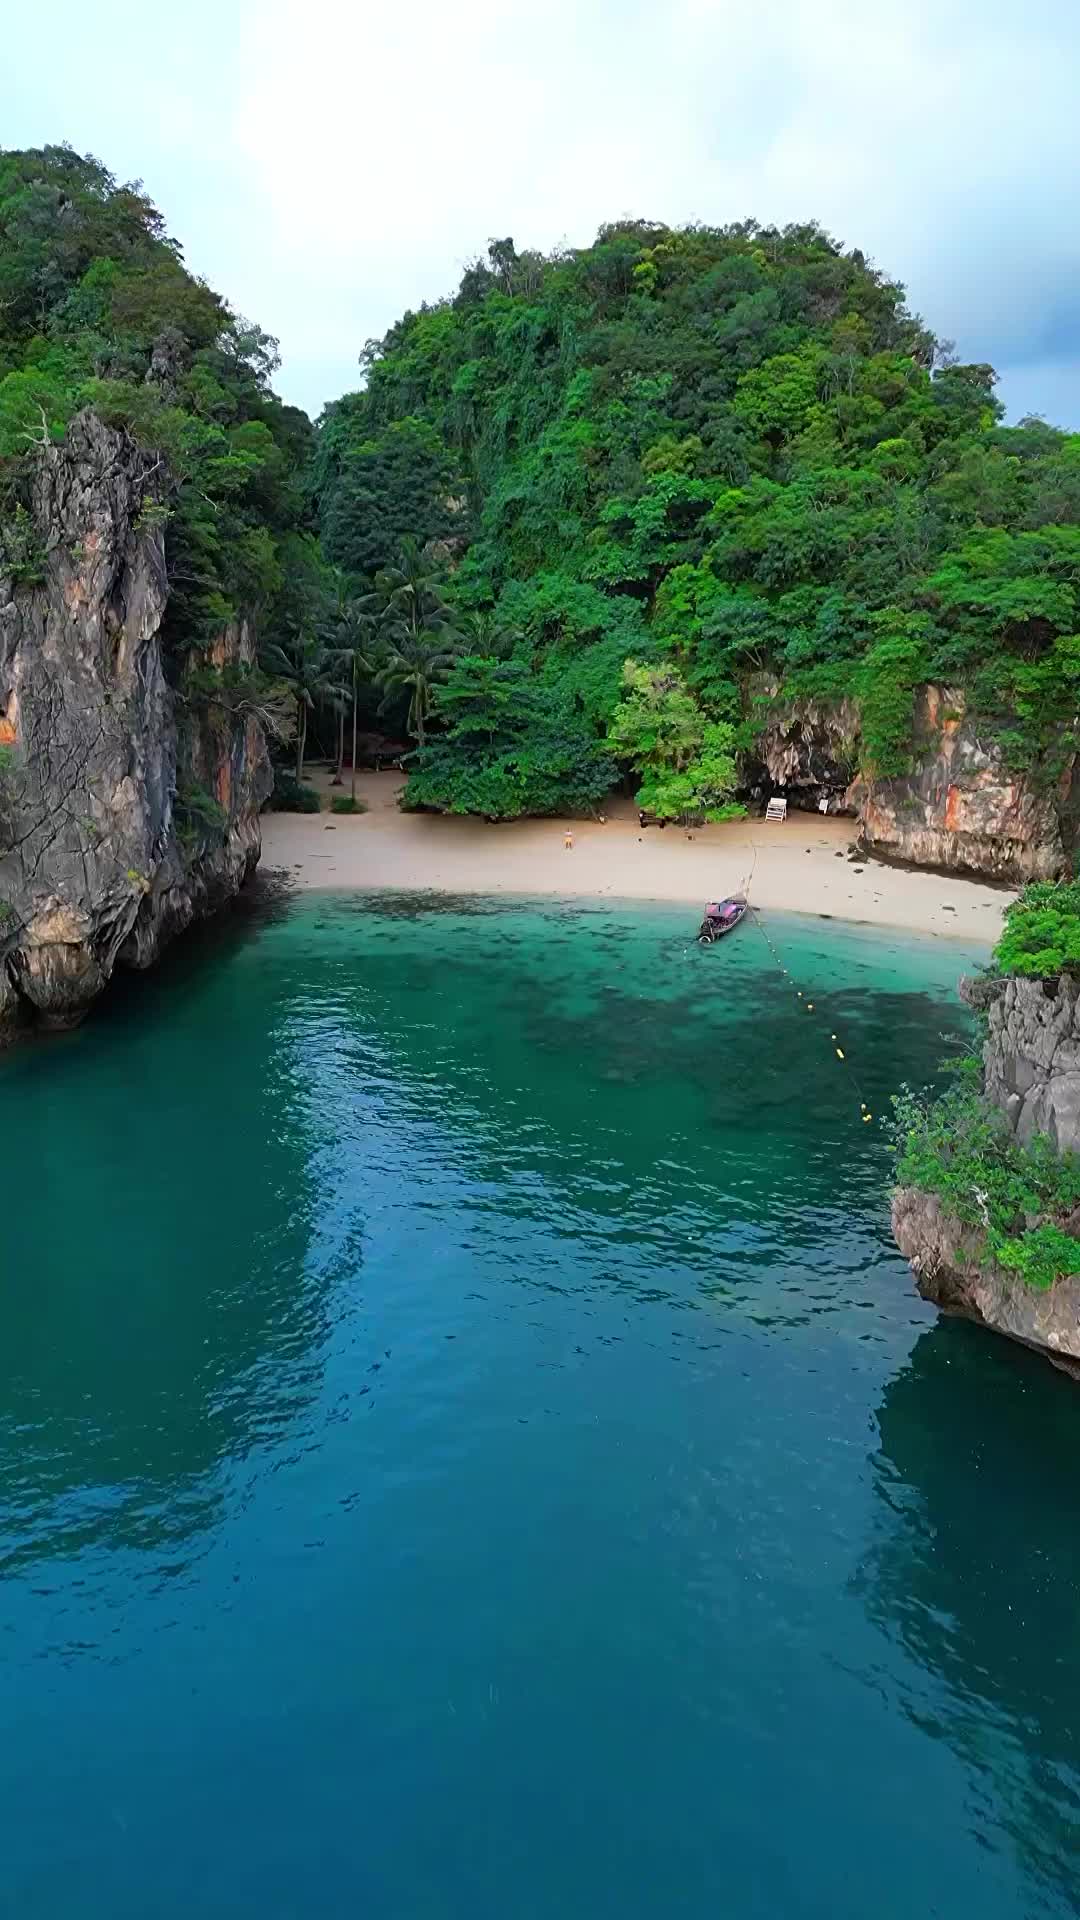 Lost in the Wild Nature of Koh Lao Lading, Thailand